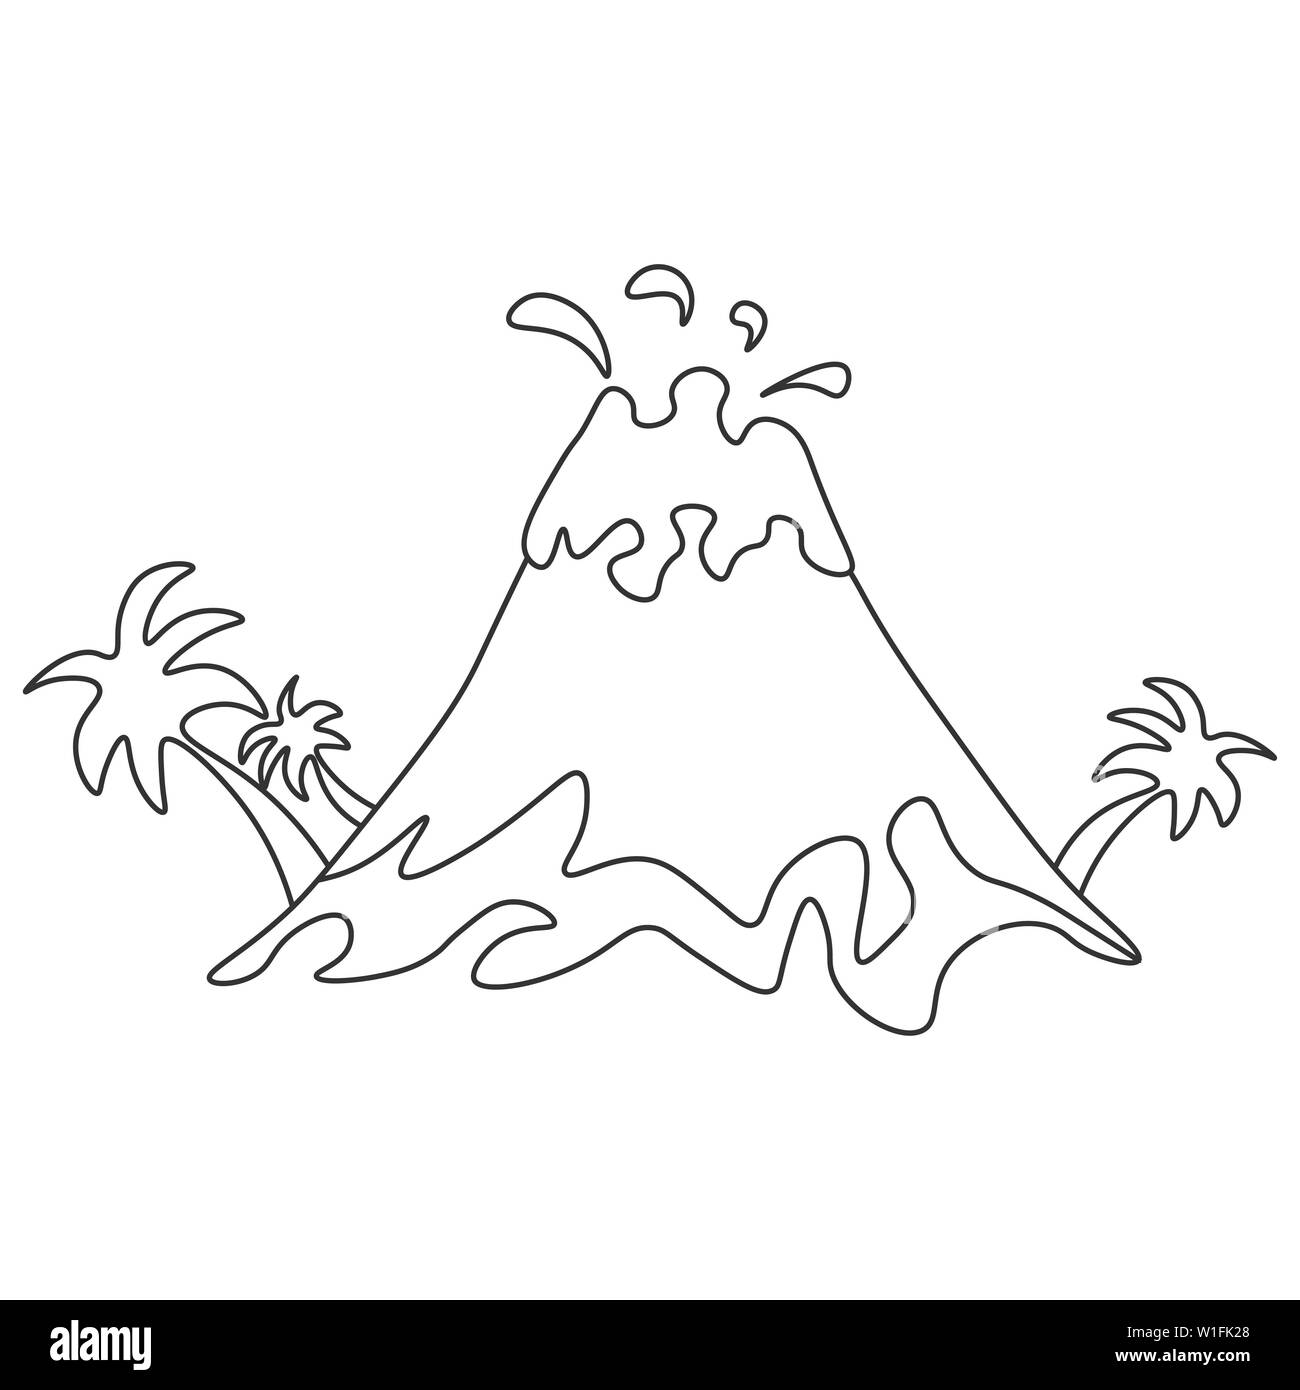 Contour of volcanic eruption with palm trees, which can be used as a coloring. Isolated on white background.  illustration. Stock Photo